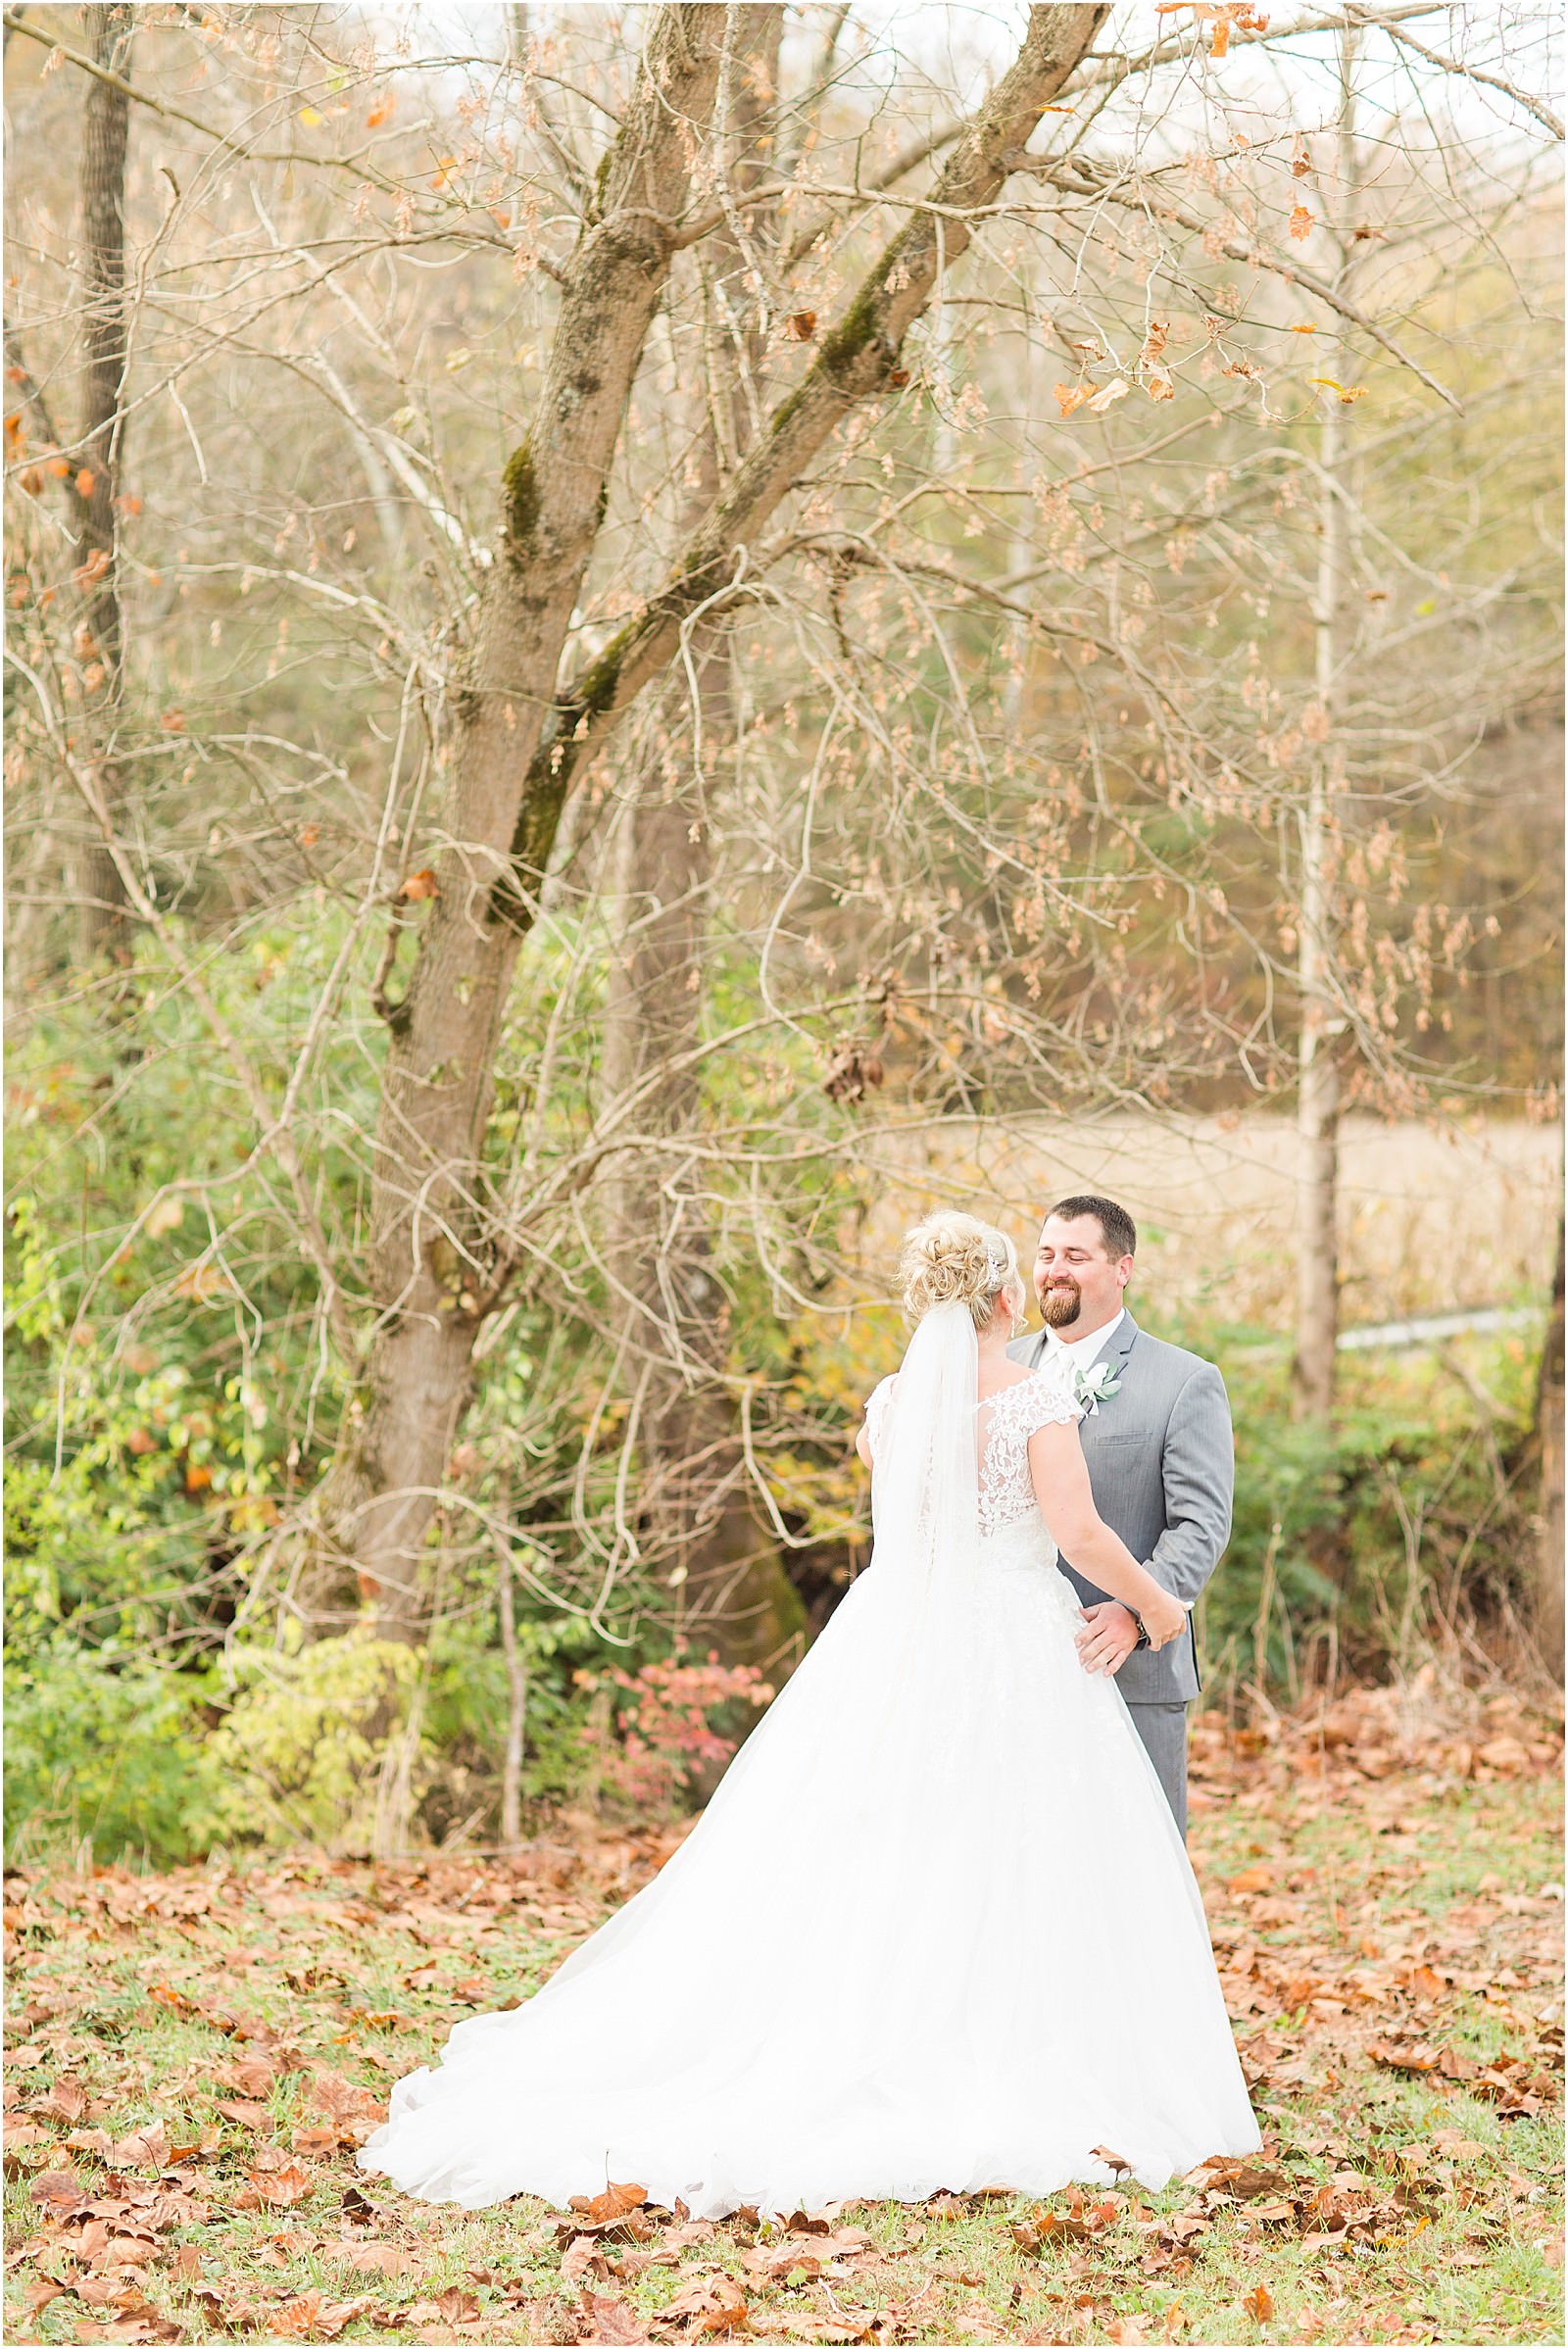 A Navy and Blush Wedding in Tell City Indiana | Brianna and Matt | Bret and Brandie Photography 0088.jpg